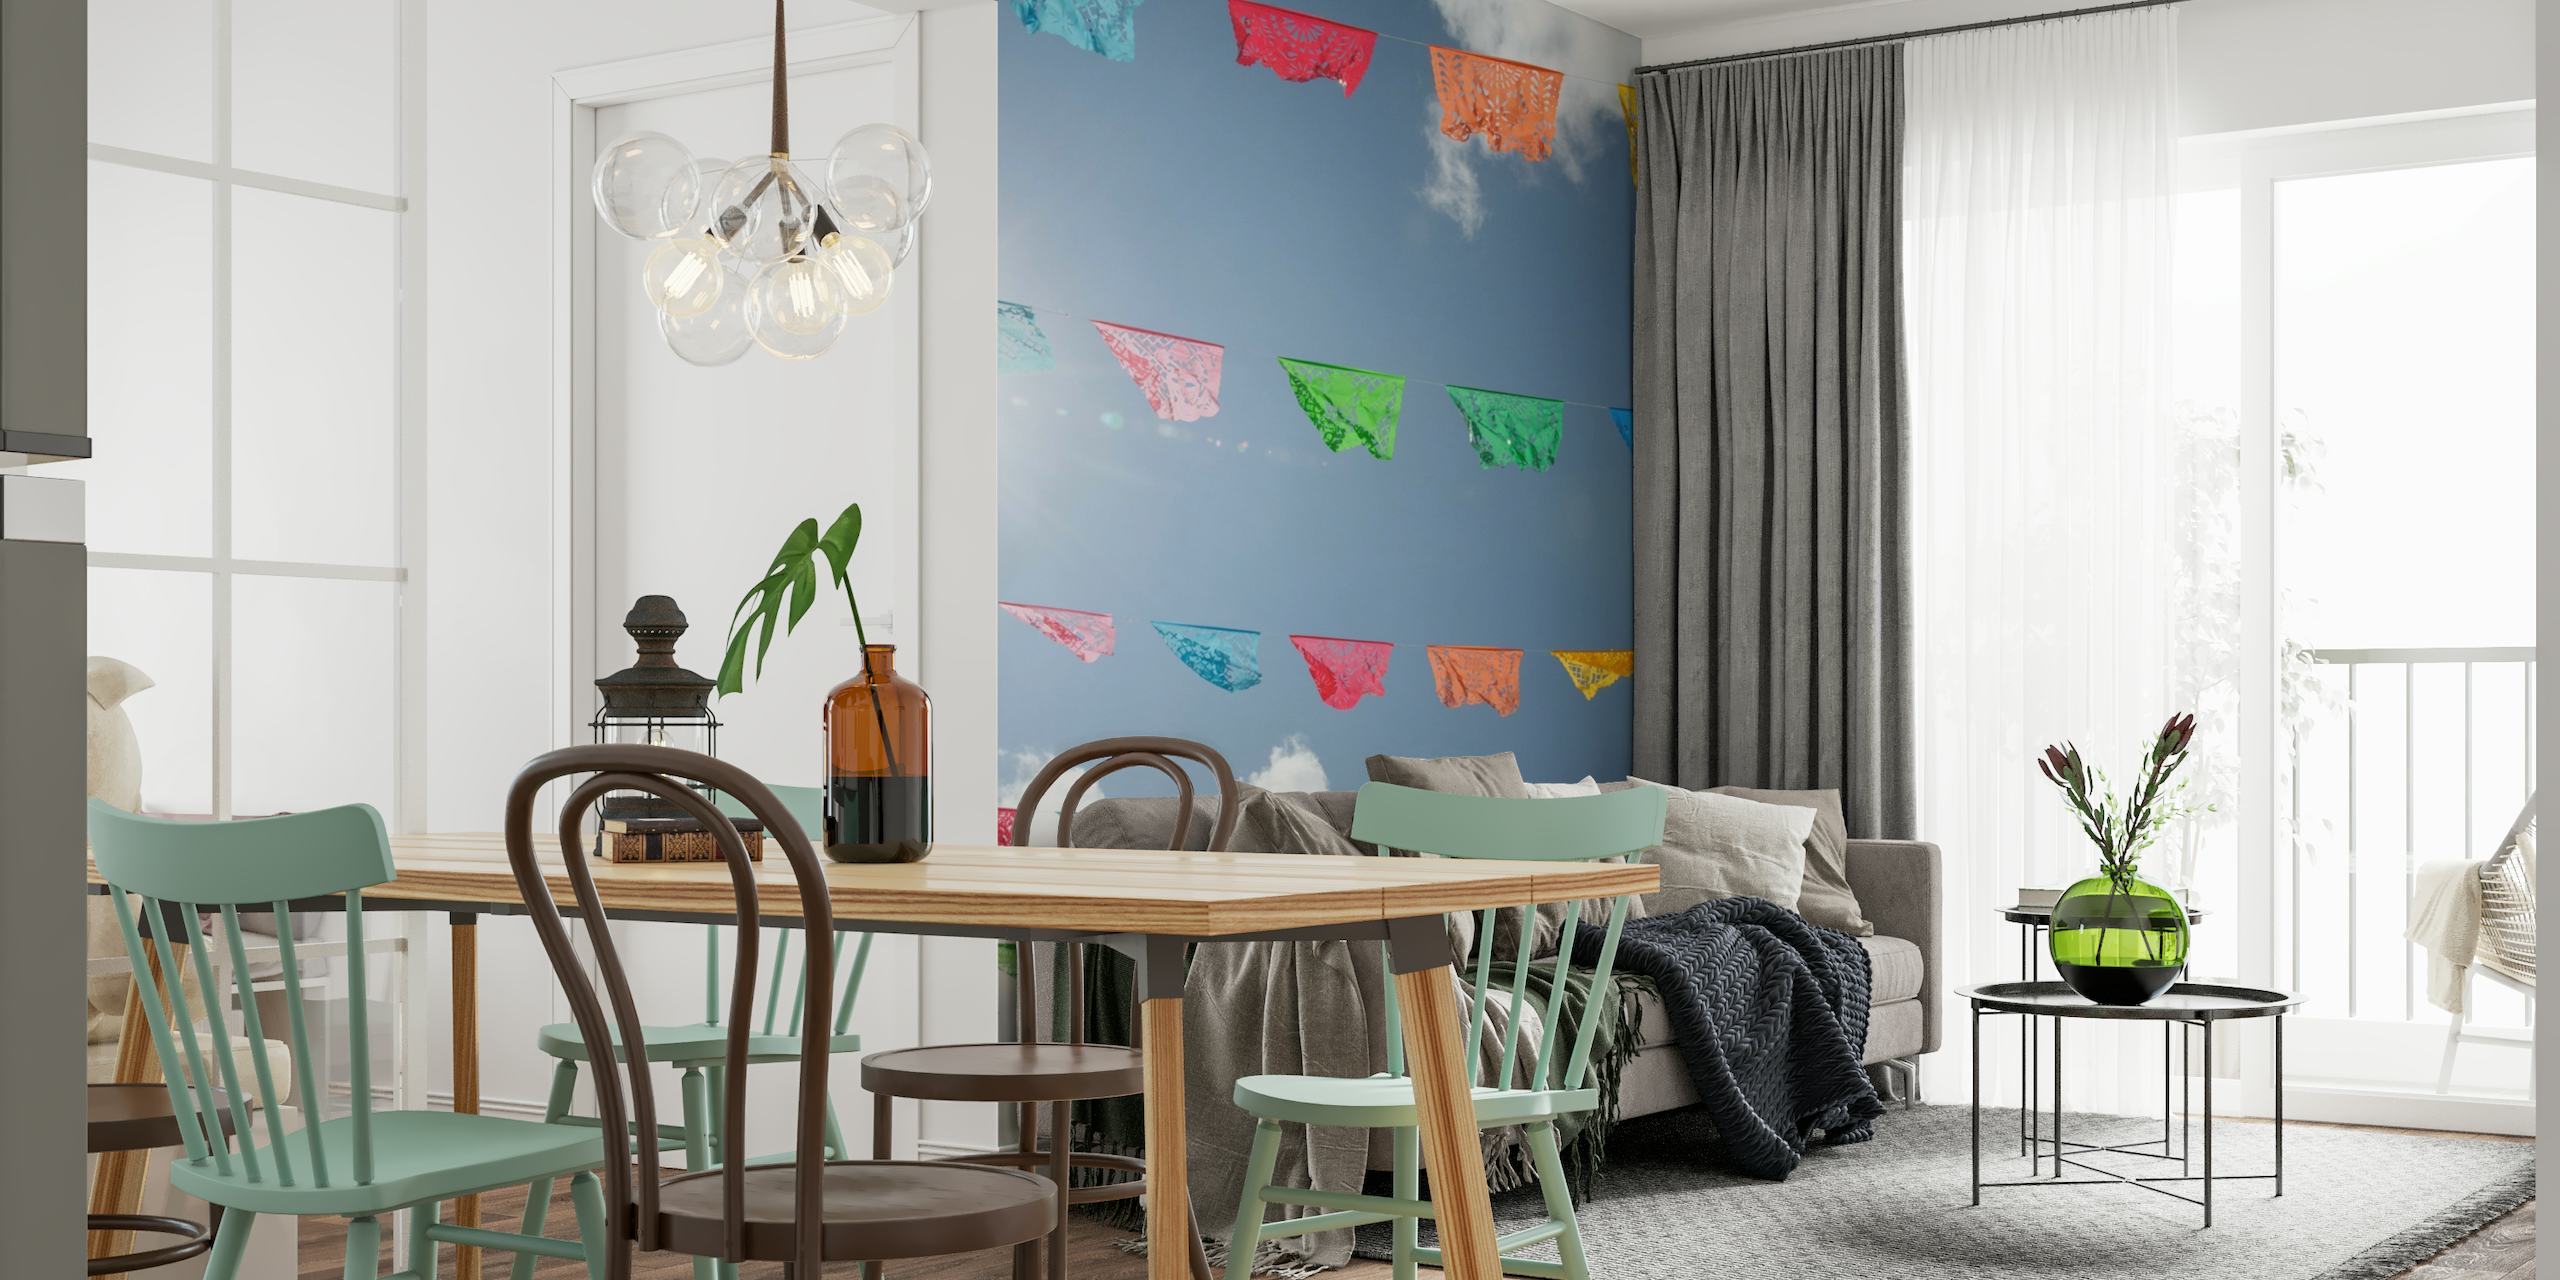 Colorful Papel Picado banners against a blue sky in a wall mural